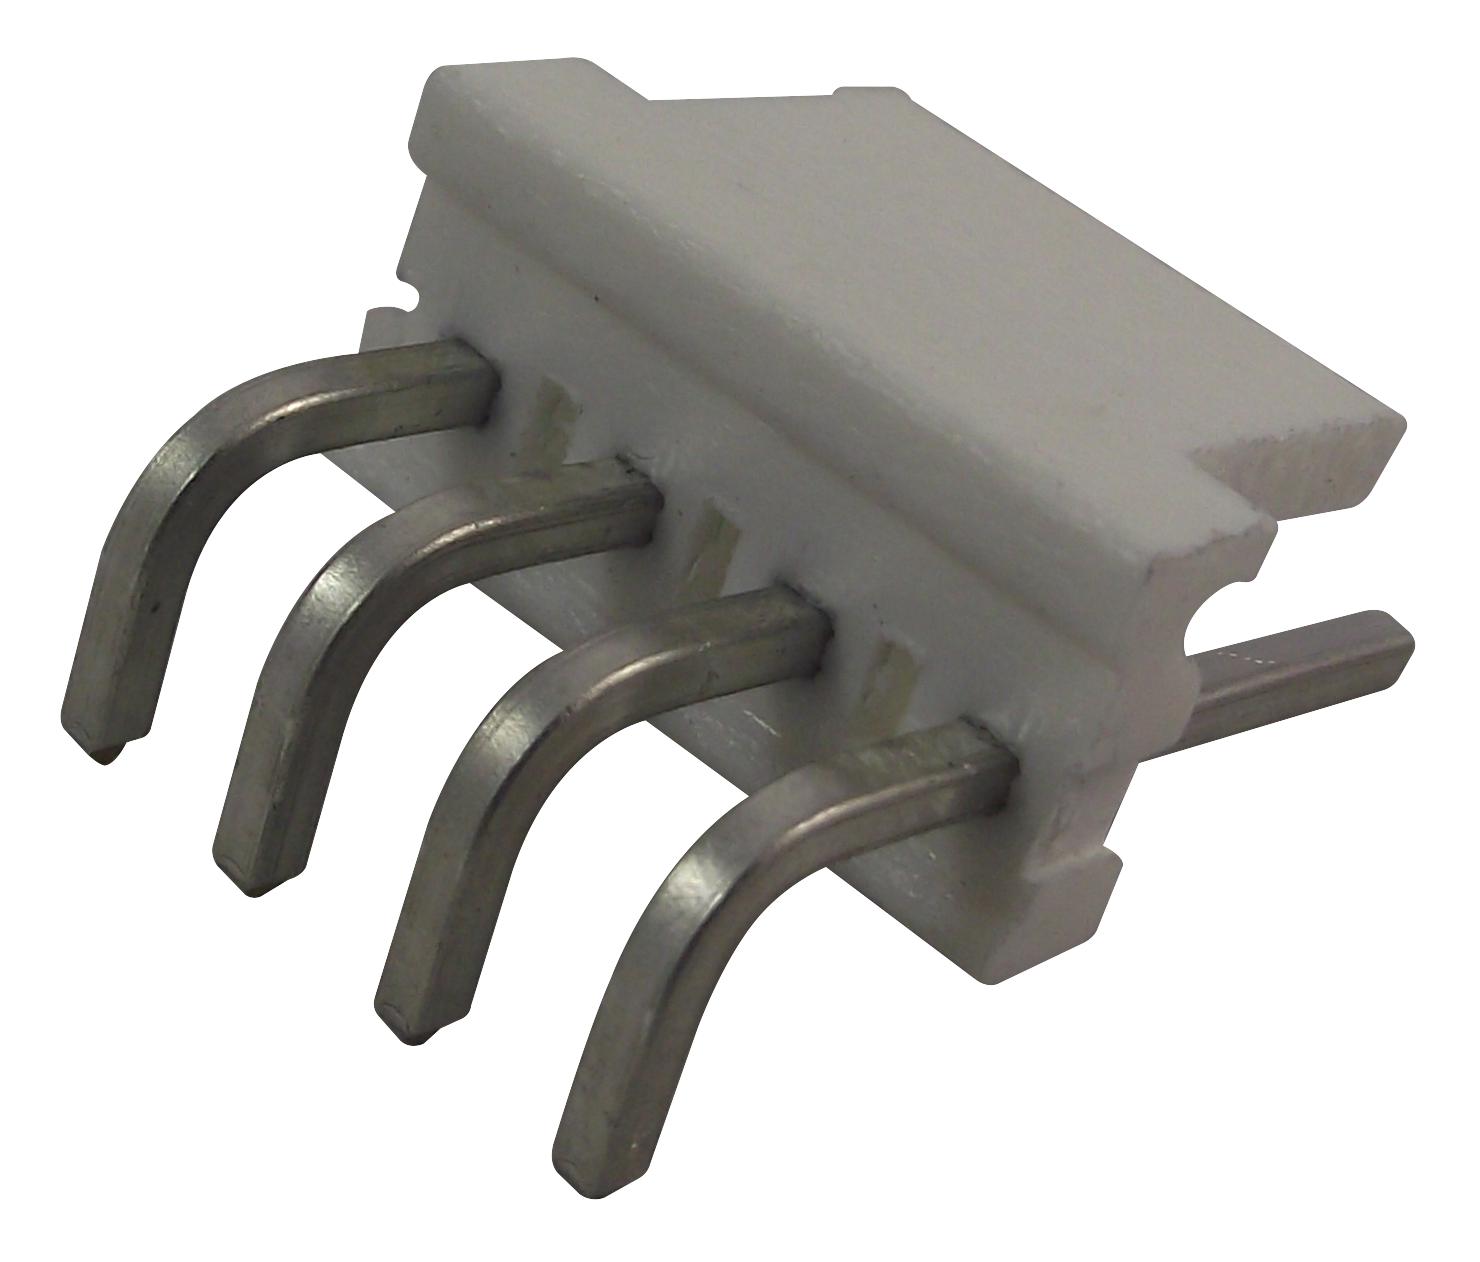 640389-4 HEADER, RIGHT ANGLE, 0.156", 4WAY AMP - TE CONNECTIVITY